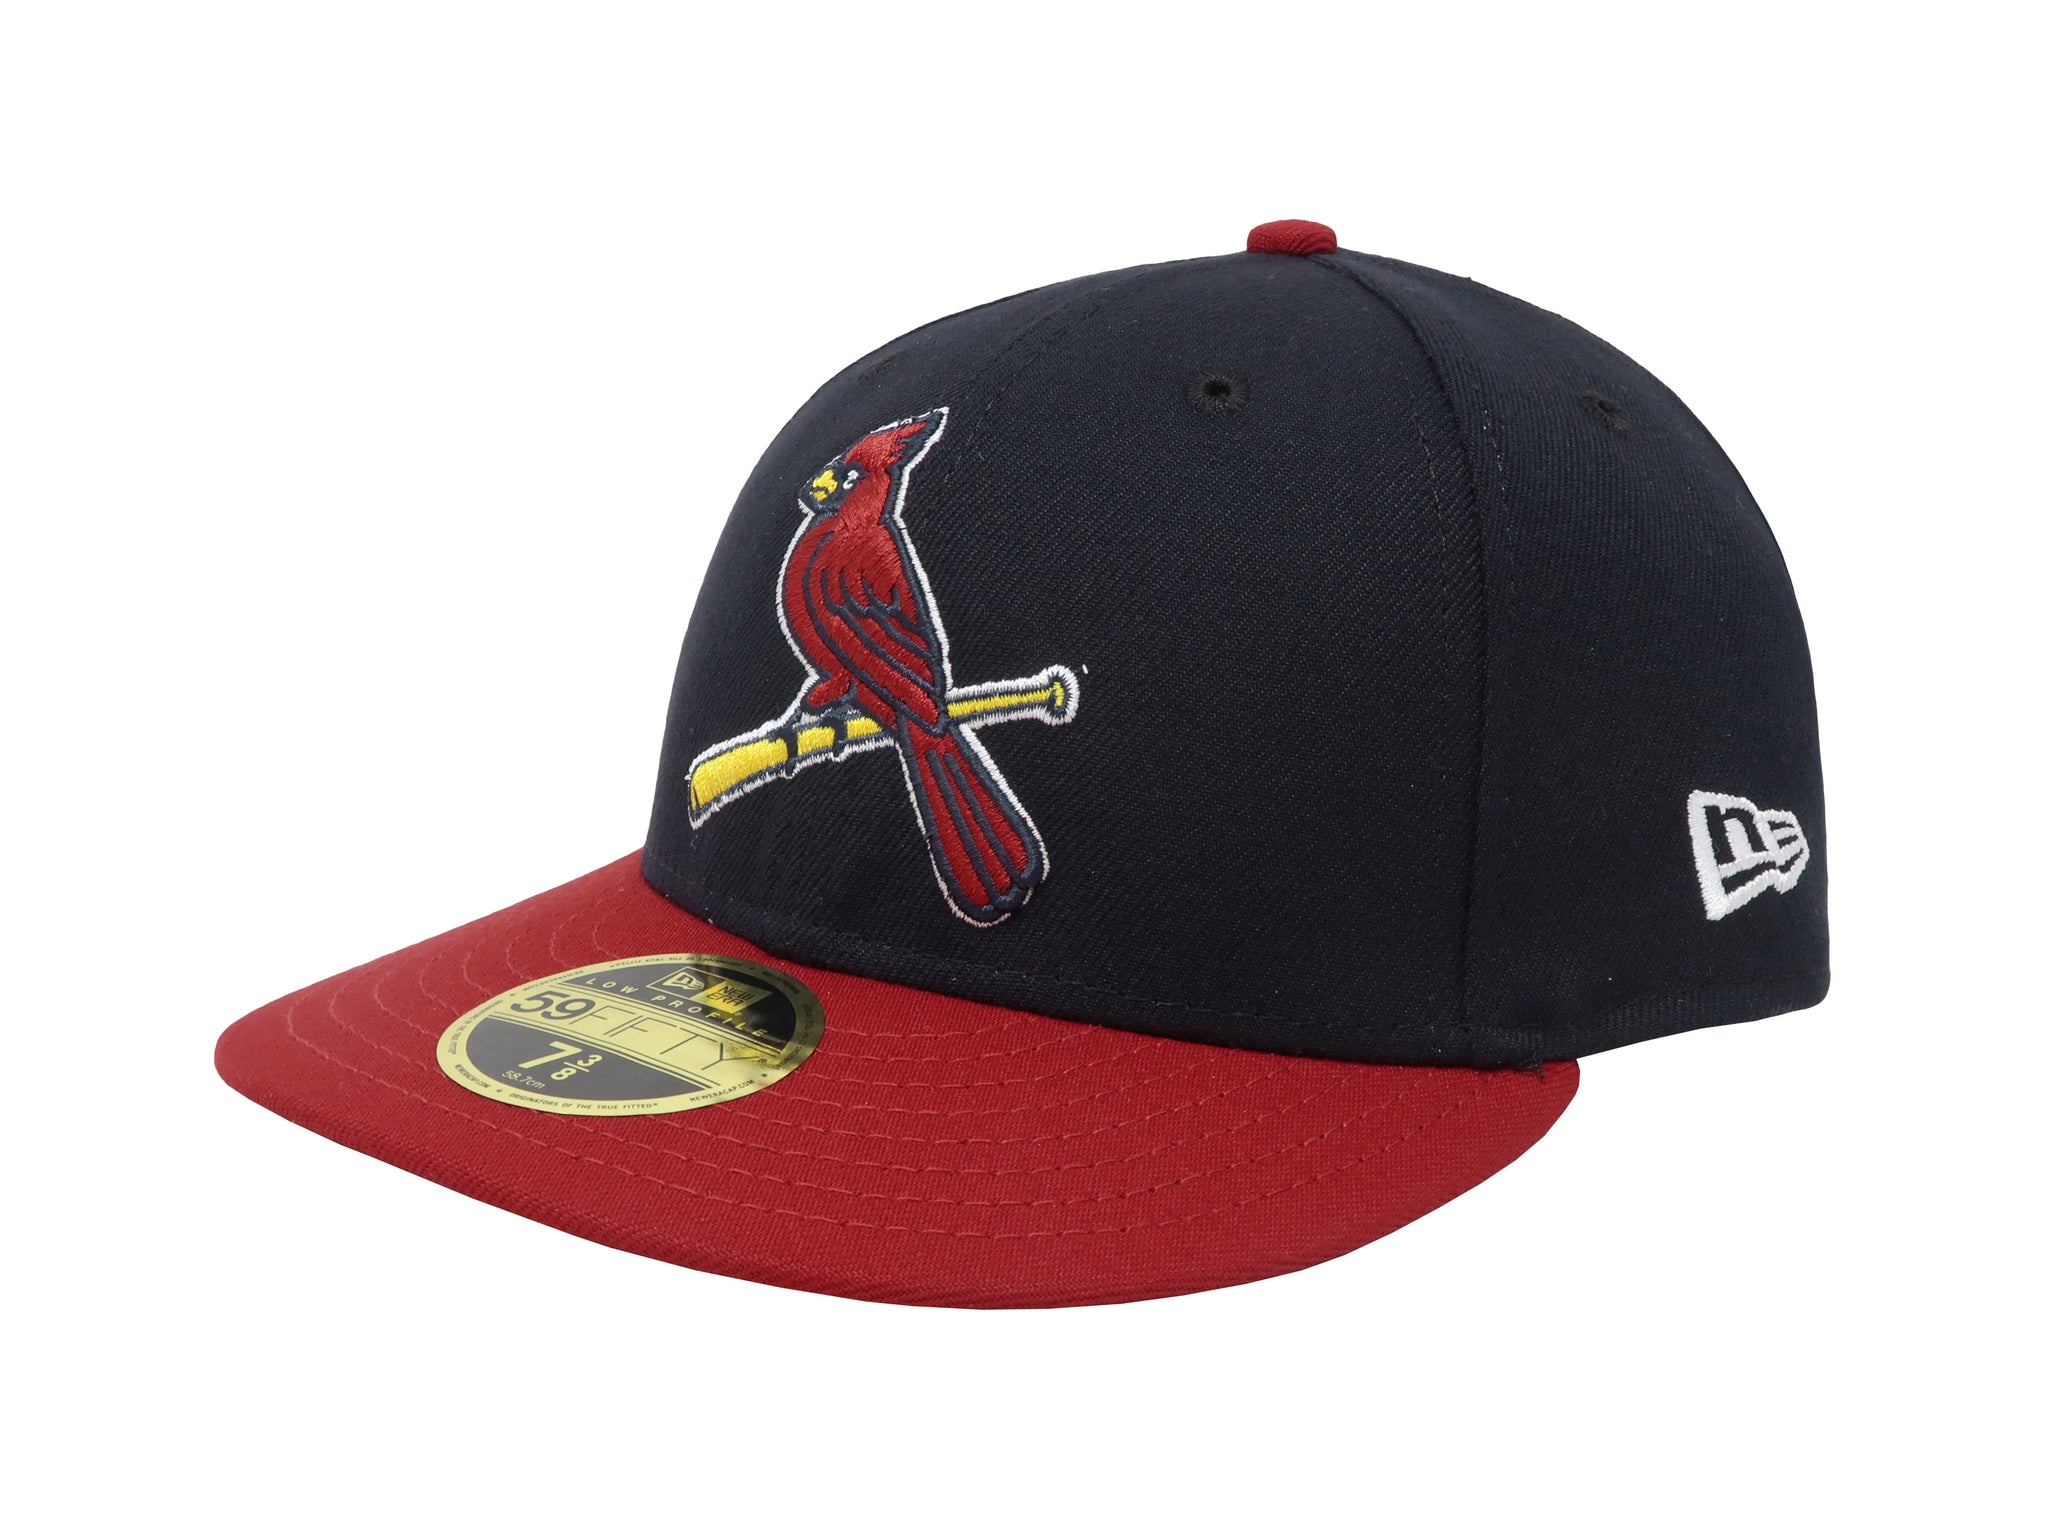 New Era 59Fifty's Men's St. Louis Cardinals Low Profile Fitted Navy Cap